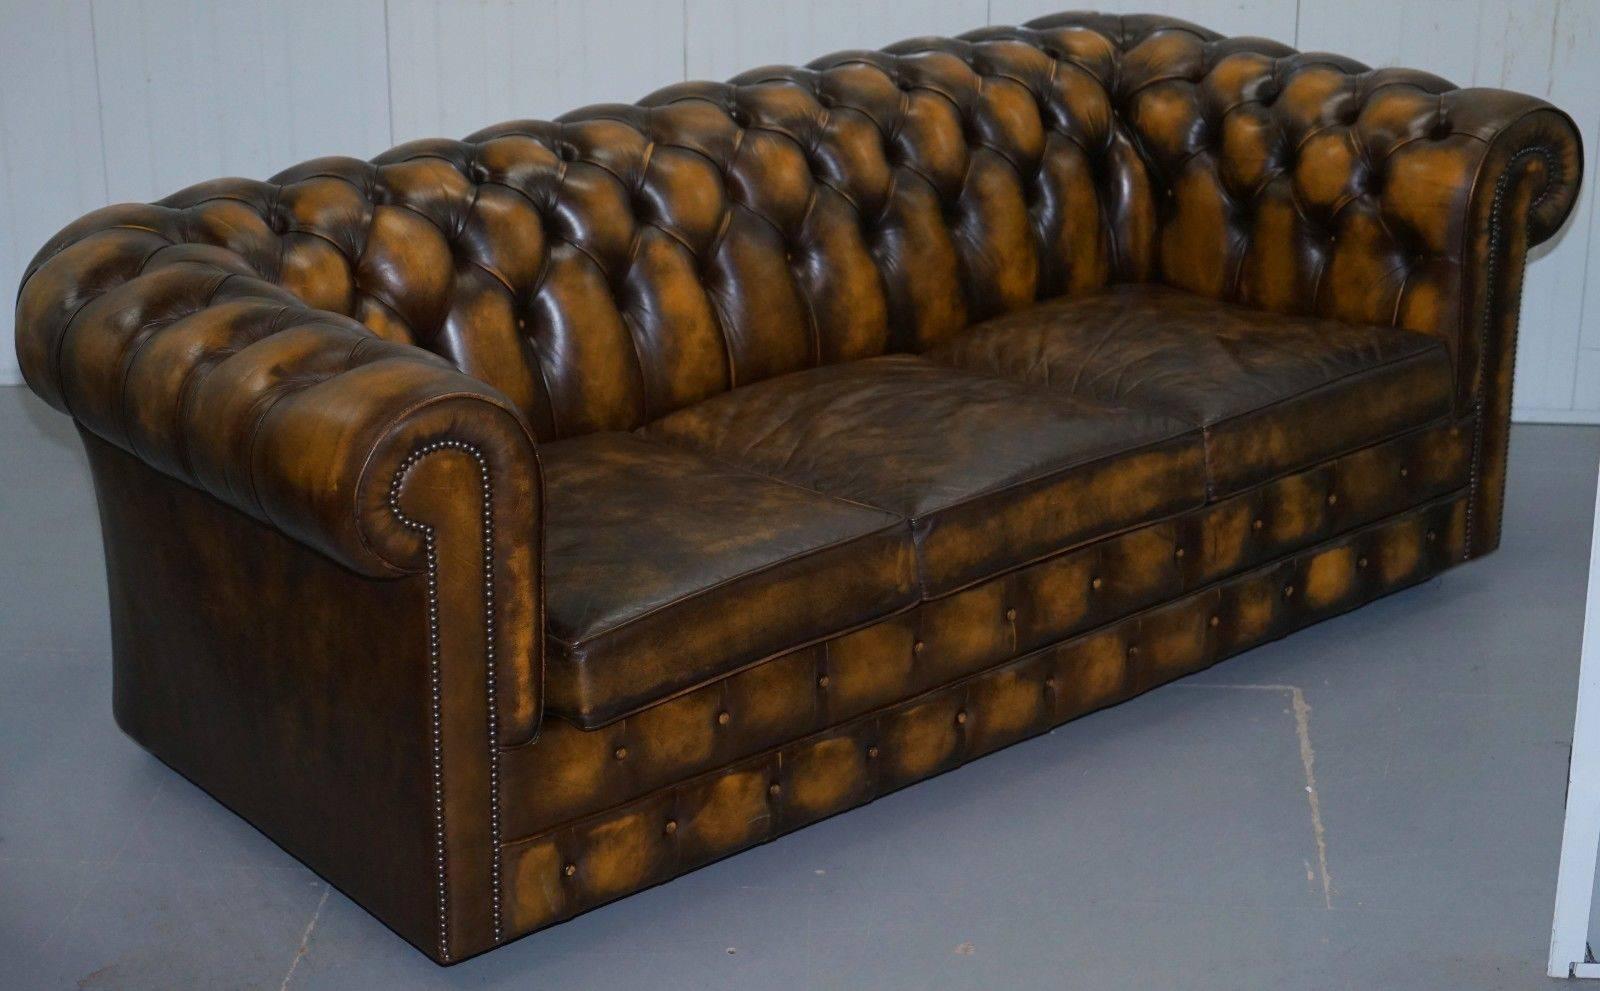 We are delighted to offer for sale this substantial Mill Brook Furnishings hand dyed aged brown leather Chesterfield sofa bed

A very rare find, this is an original Mill Brook of England sofabed with original spring bed frame and foam pad mattress